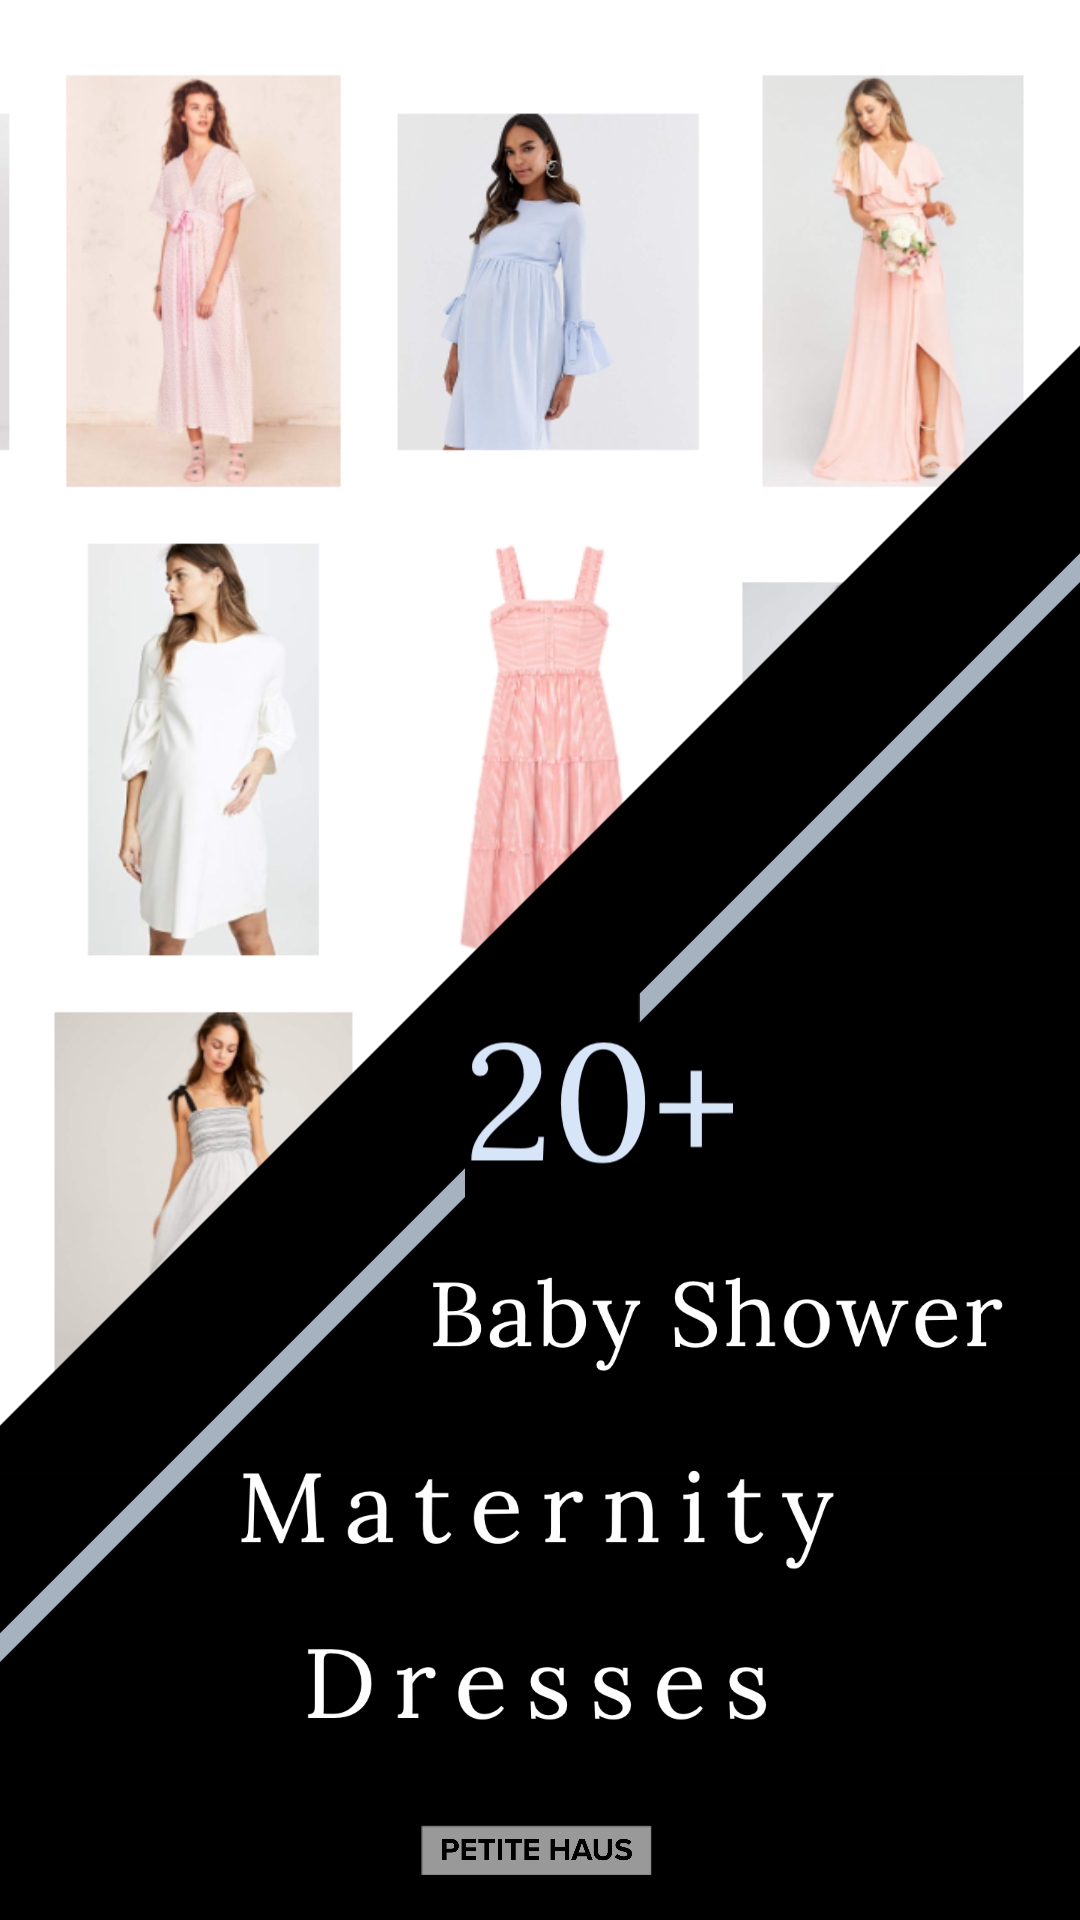 Baby Shower Dresses, Maternity Dresses, What to Wear to a Baby Shower, Romantic Maternity Dress, maternity photoshoot dress outfit